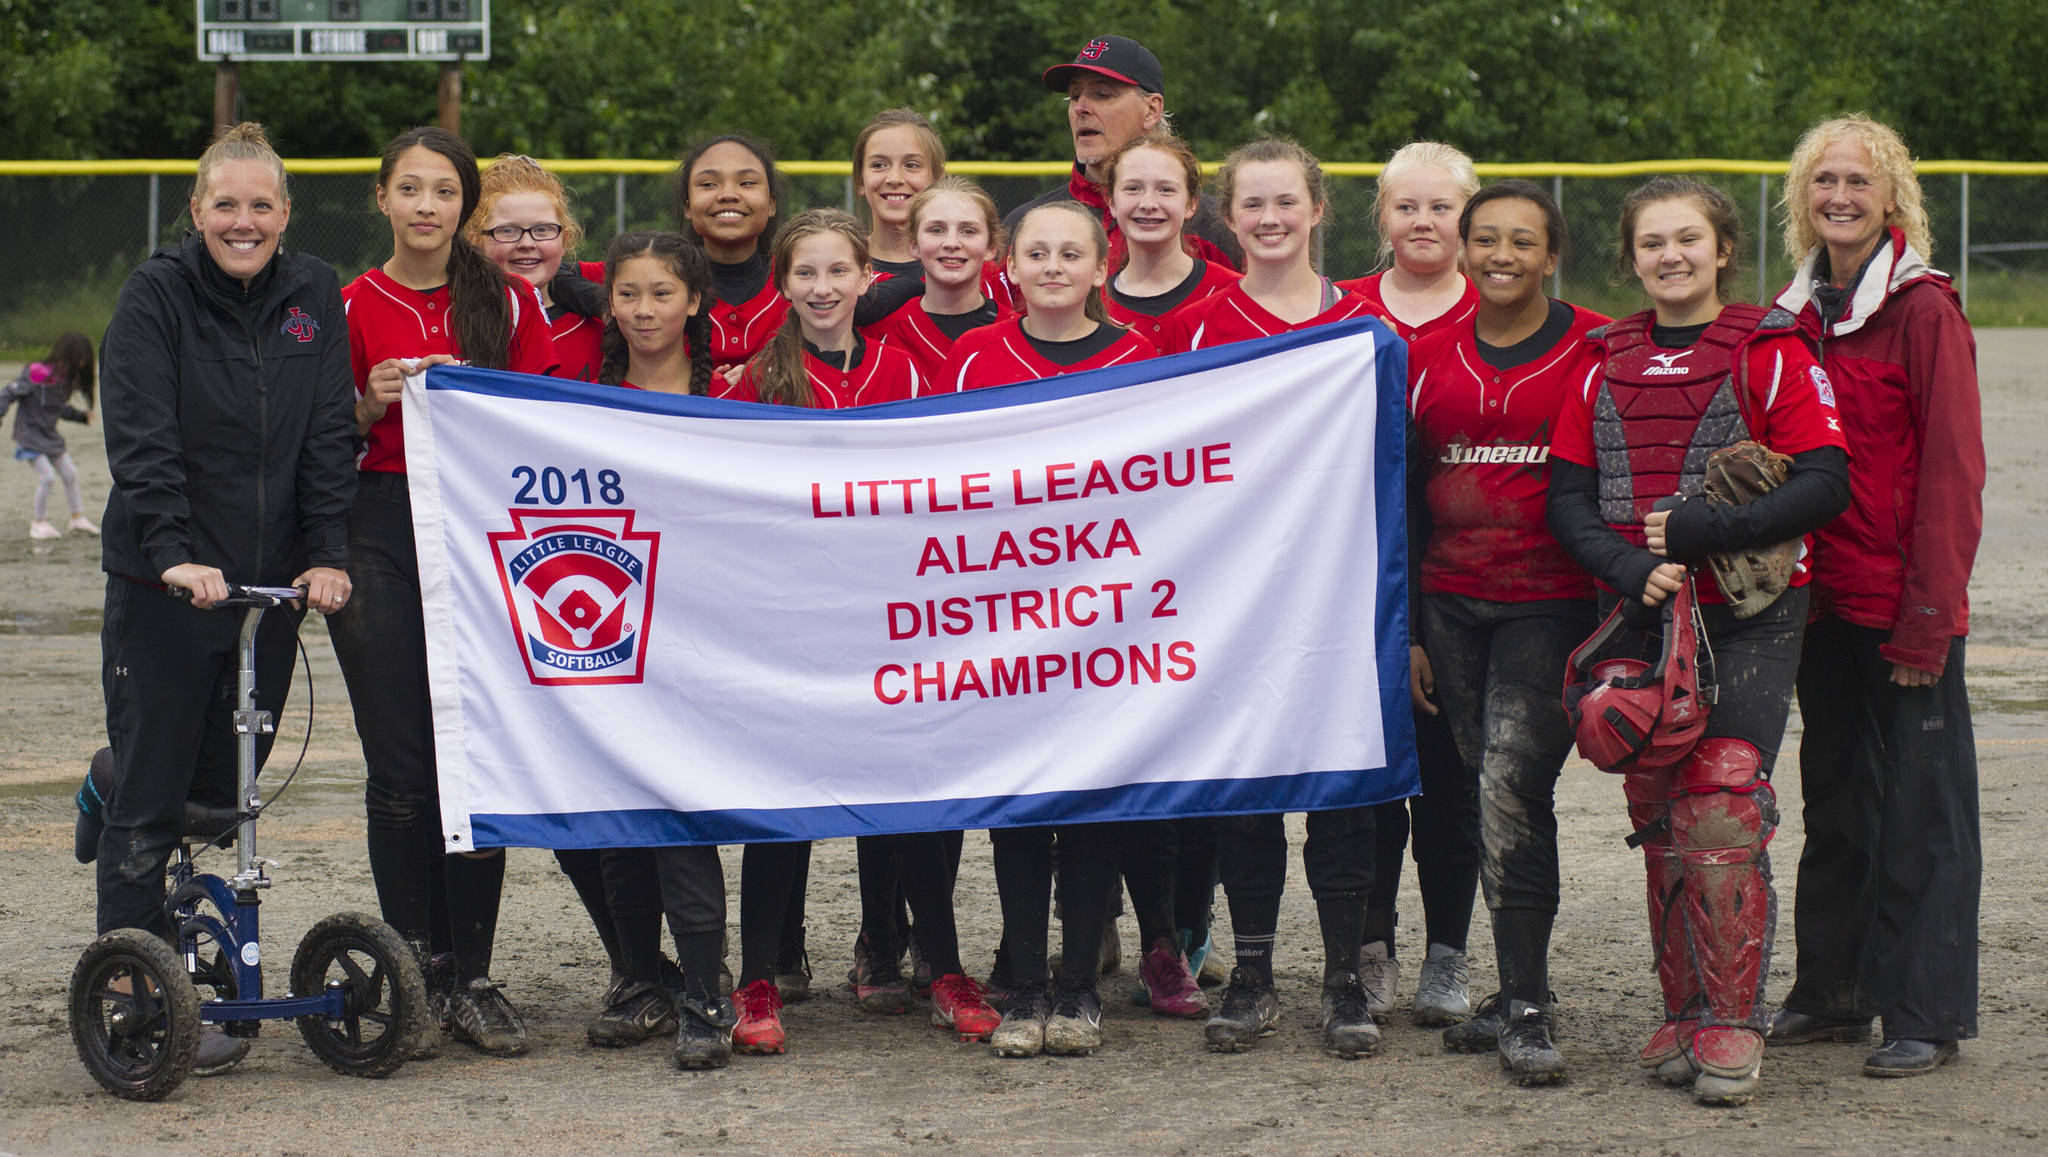 The GCLL Major Softball All-Stars pose with their Alaska District 2 championship banner after defeating Ketchikan Little League, 6-3, in the championship game. (Nolin Ainsworth | Juneau Empire)